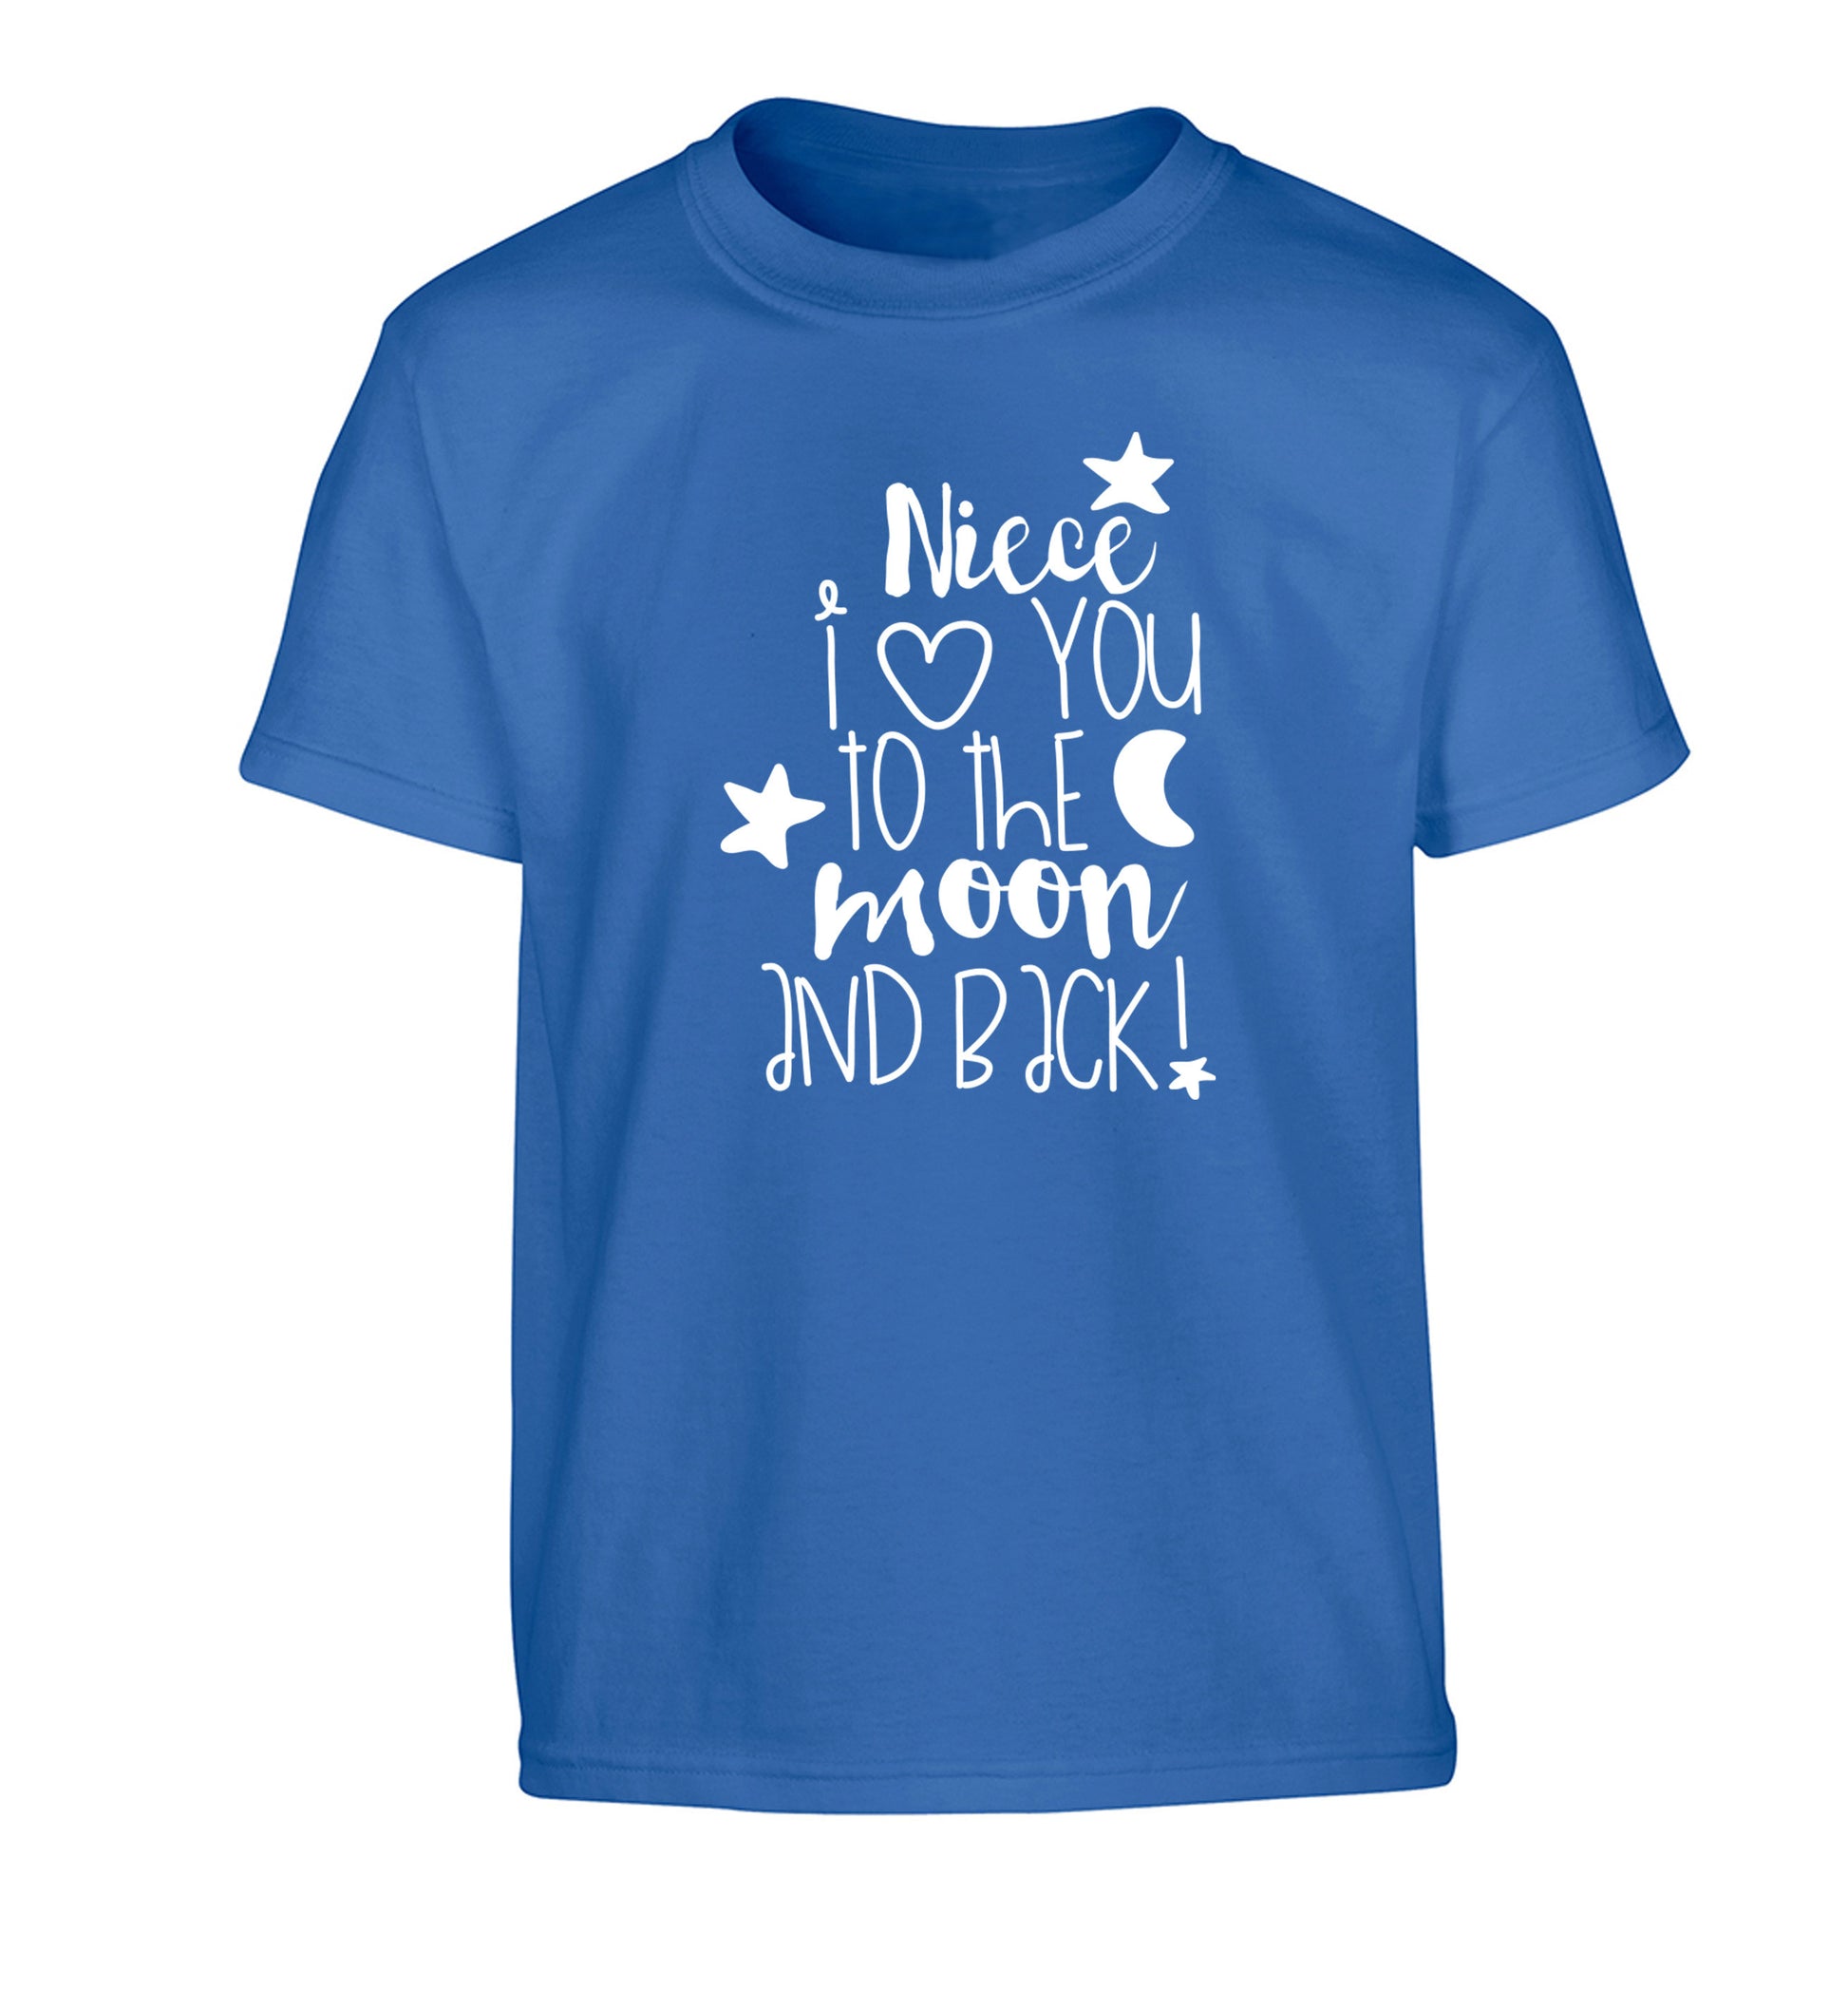 Niece I love you to the moon and back Children's blue Tshirt 12-14 Years